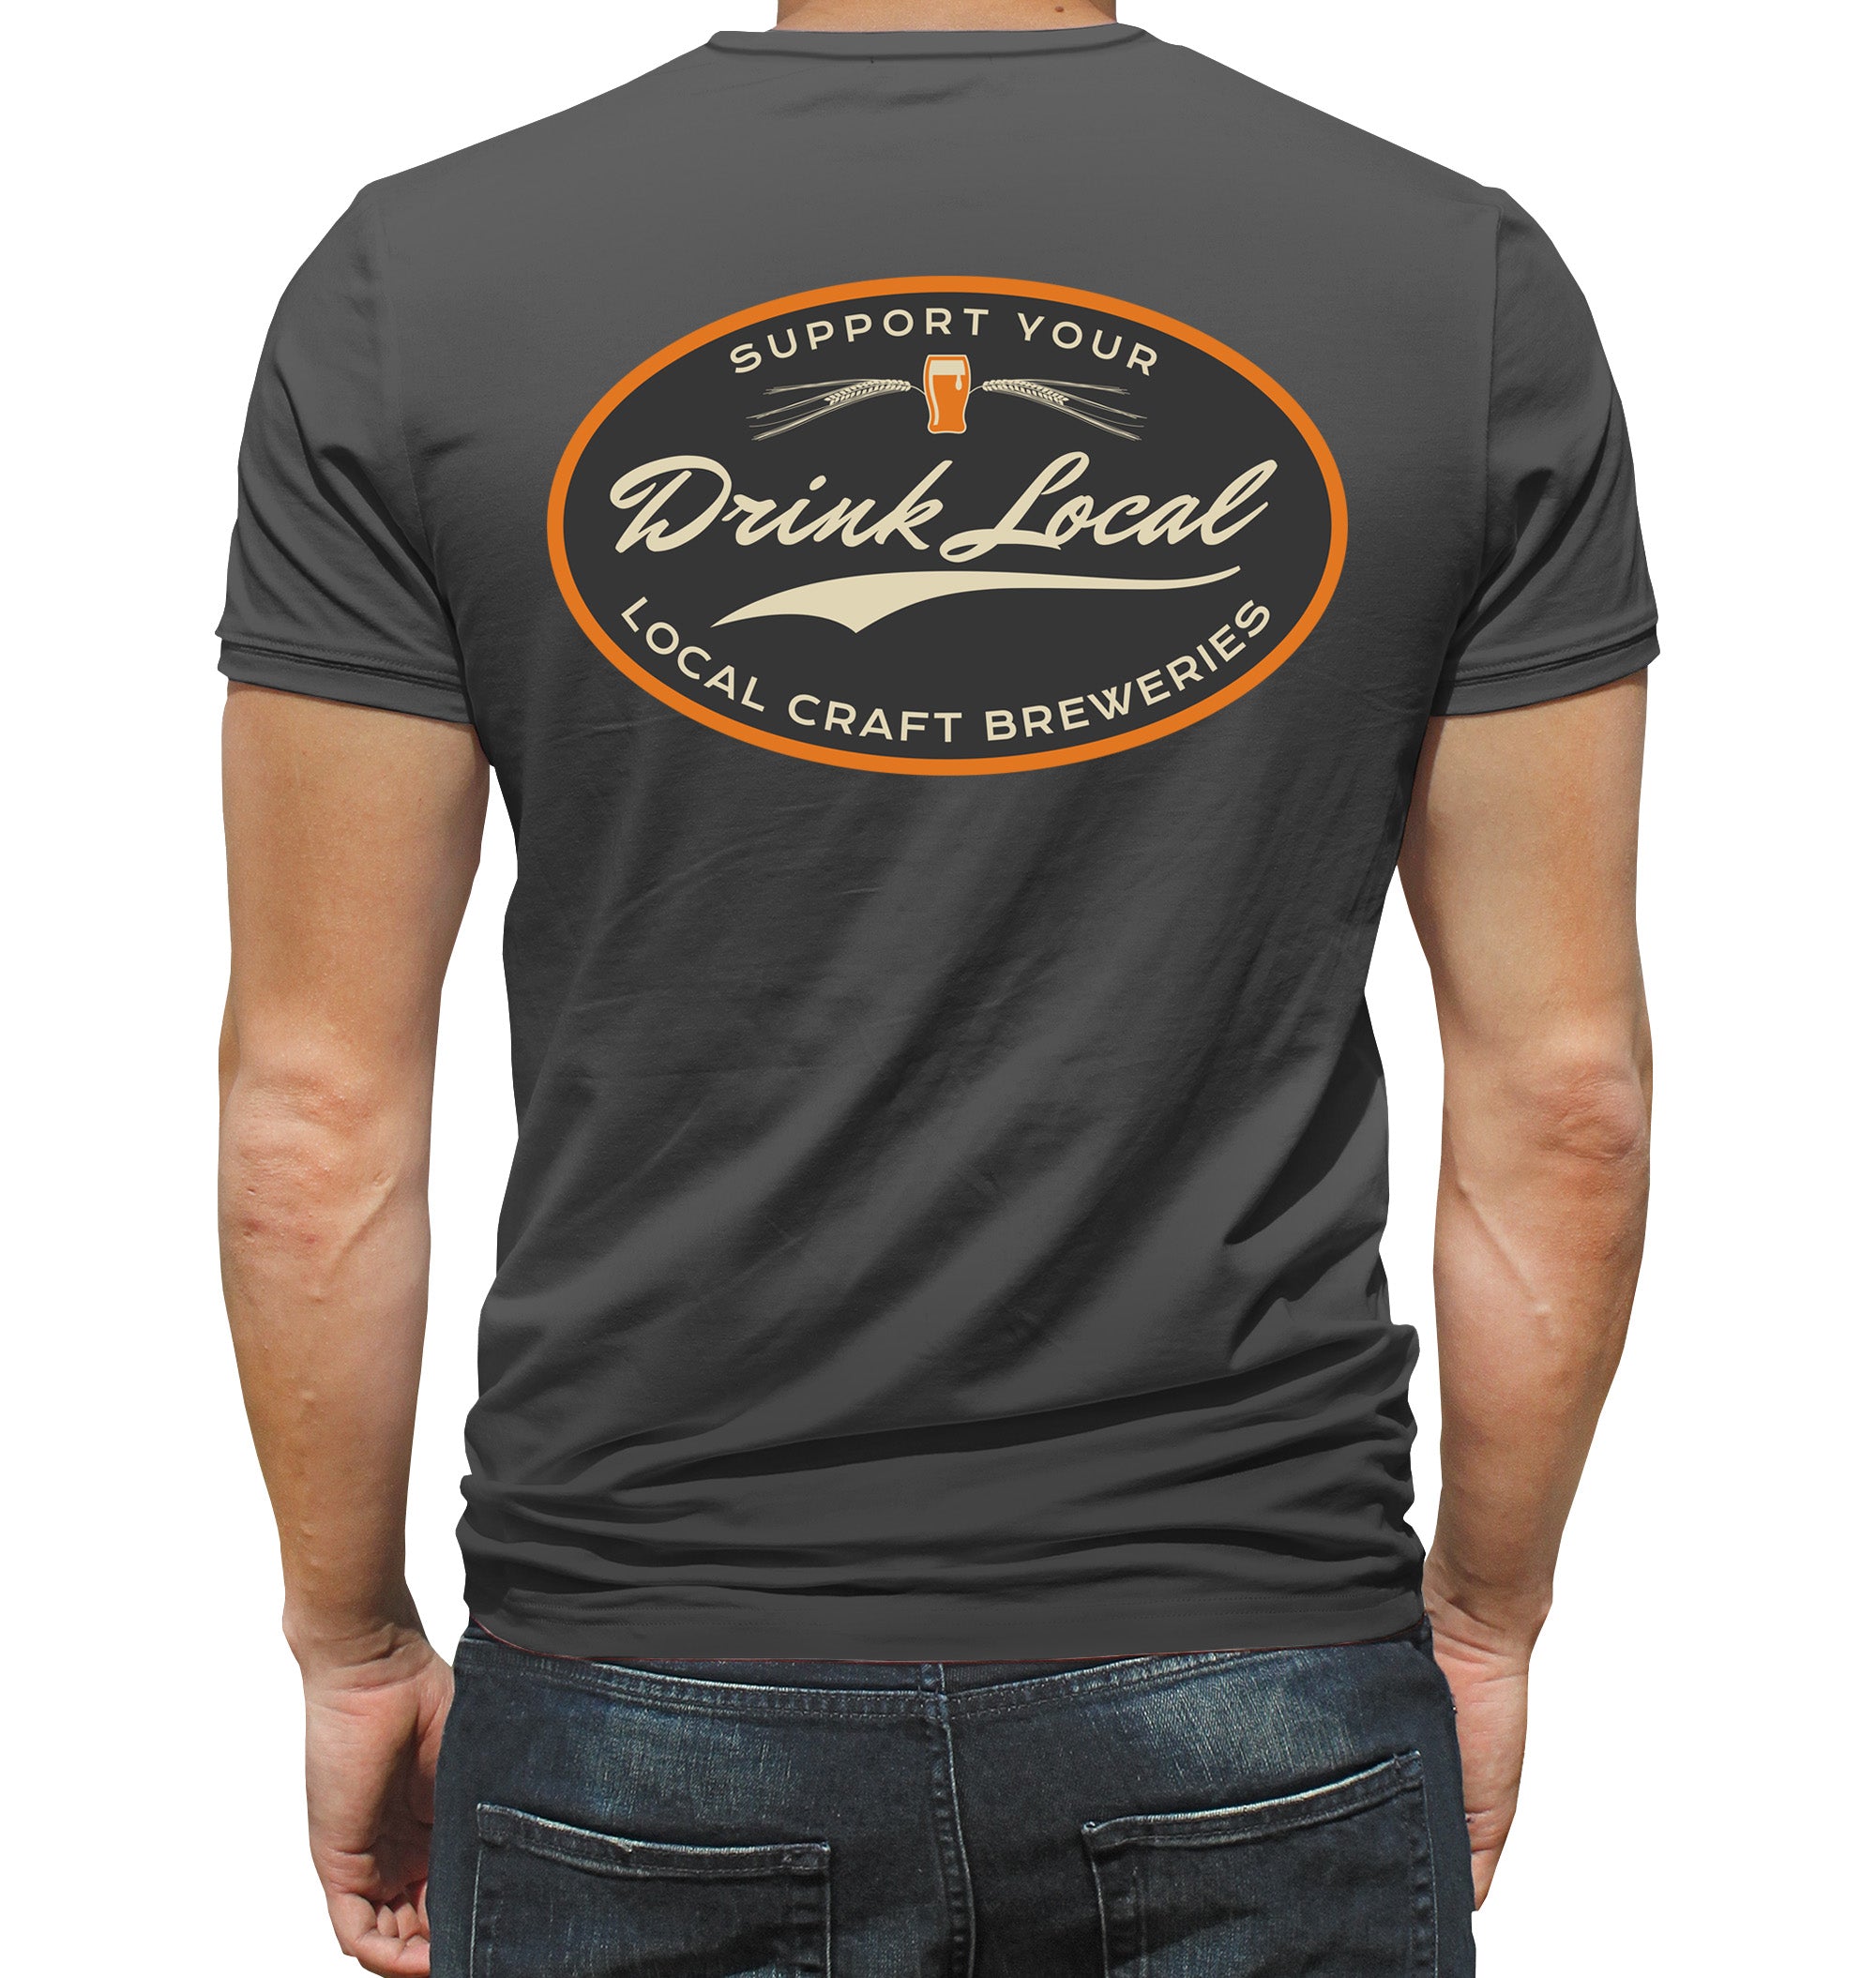 craft beer t shirts